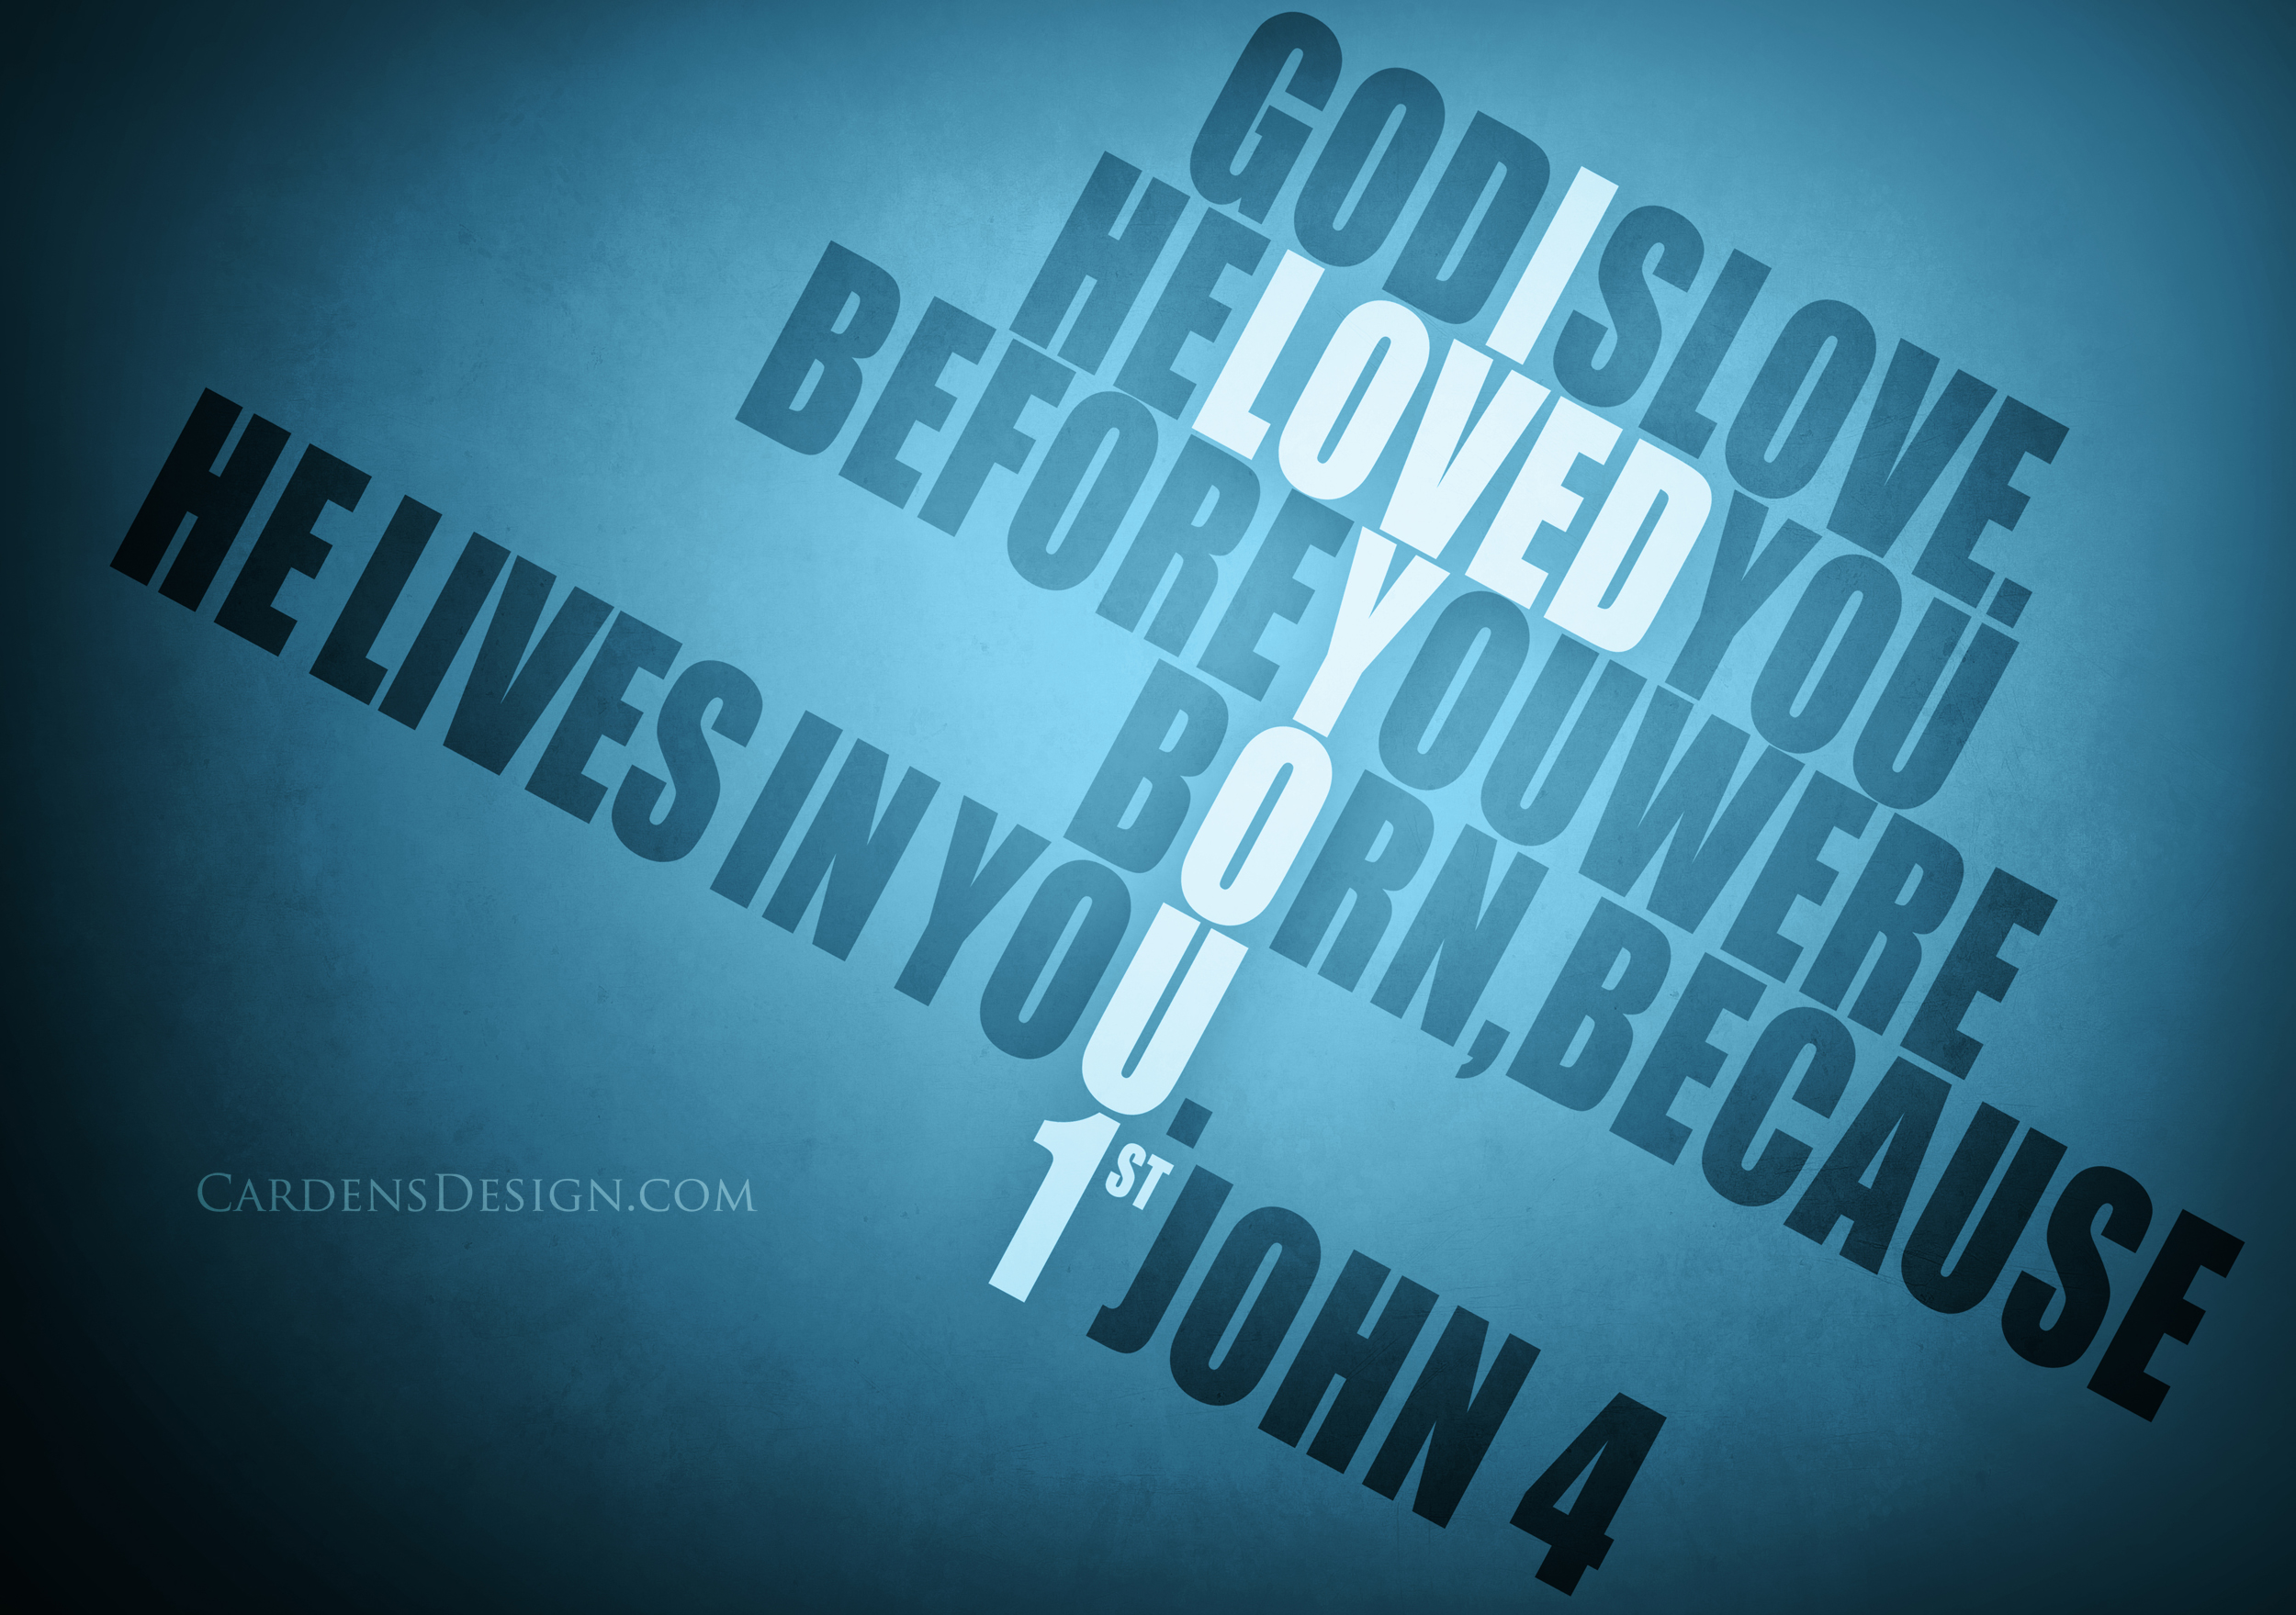 Cool christian wallpapers